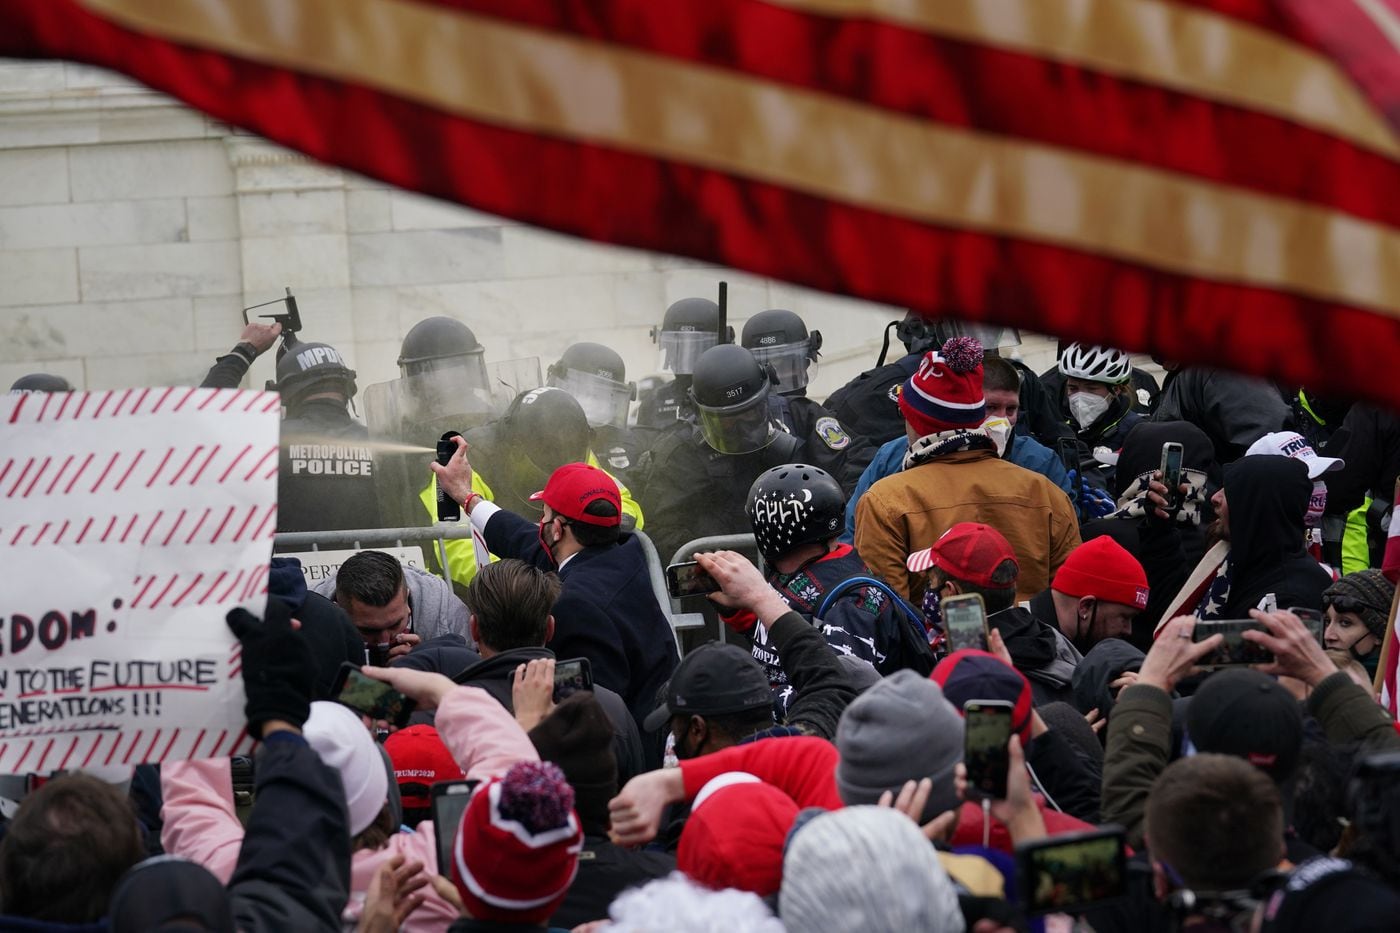 Photo by Jessica Griffin, The Philadelphia Inquirer - A mob engages with police trying to get past the barriers outside the U.S. Capitol building on January 6, 2021.
